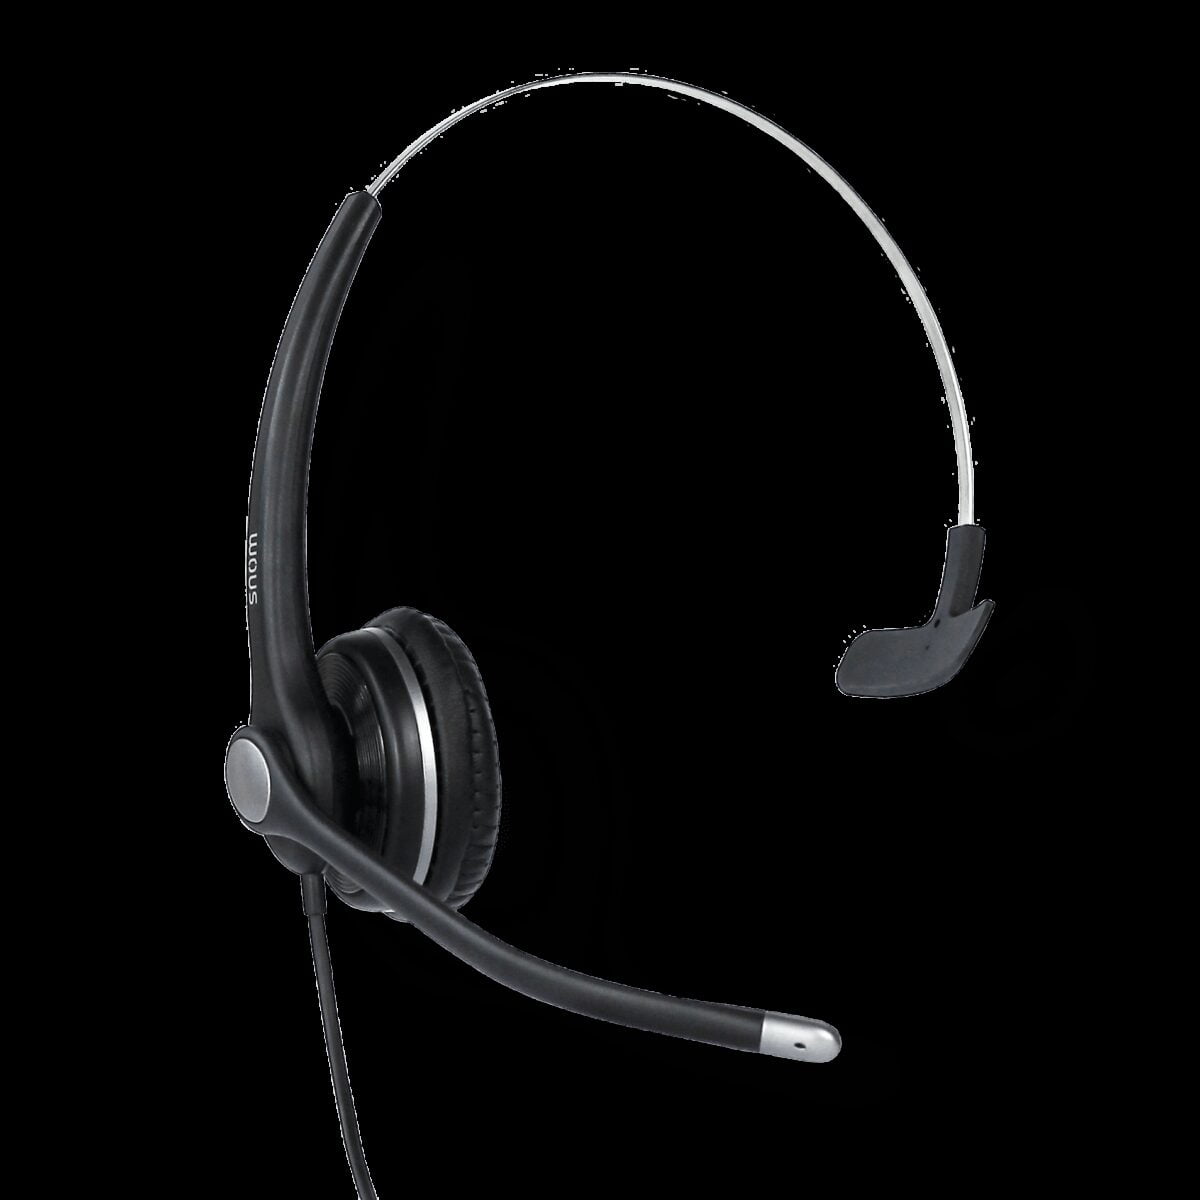 Snom A100 Monaural Headset - Wideband - Noise Cancellation